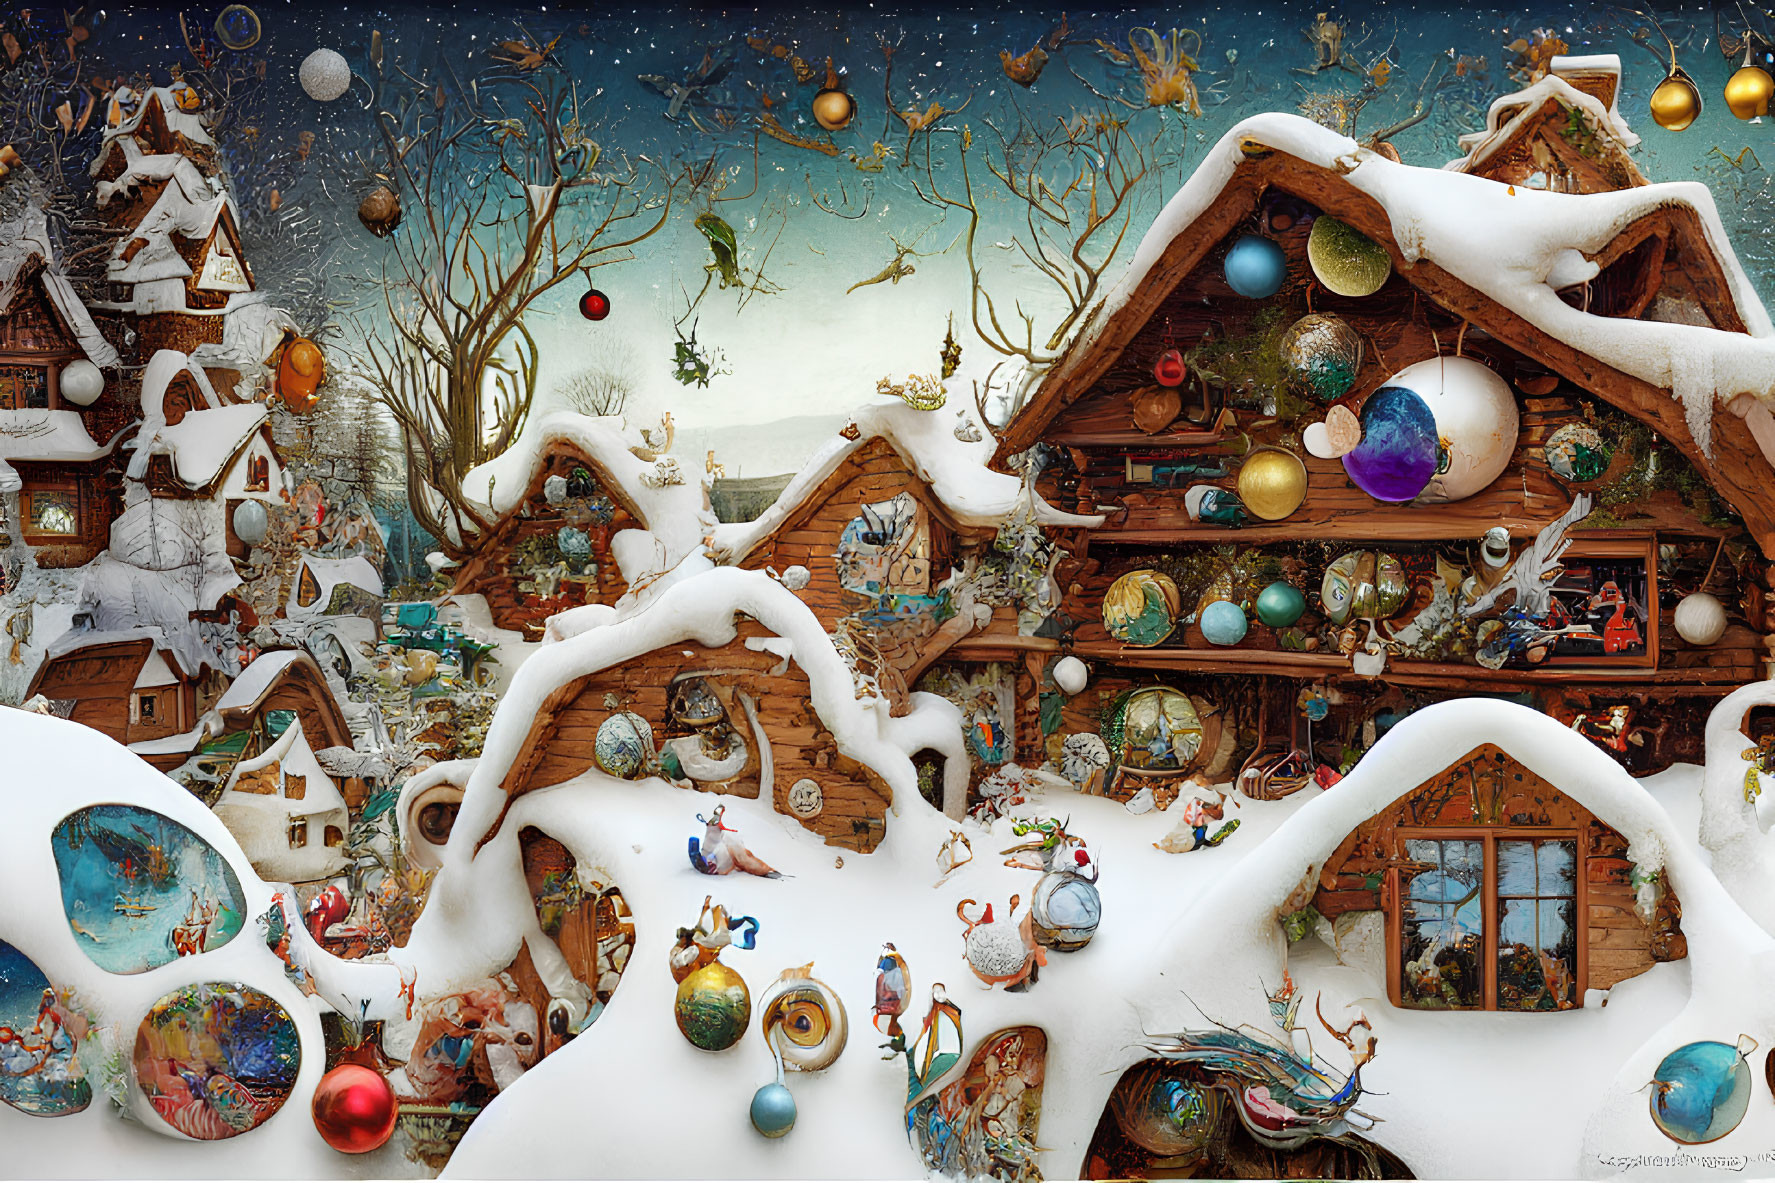 Snow-covered cottages, floating ornaments, and magical rabbits in a whimsical winter scene